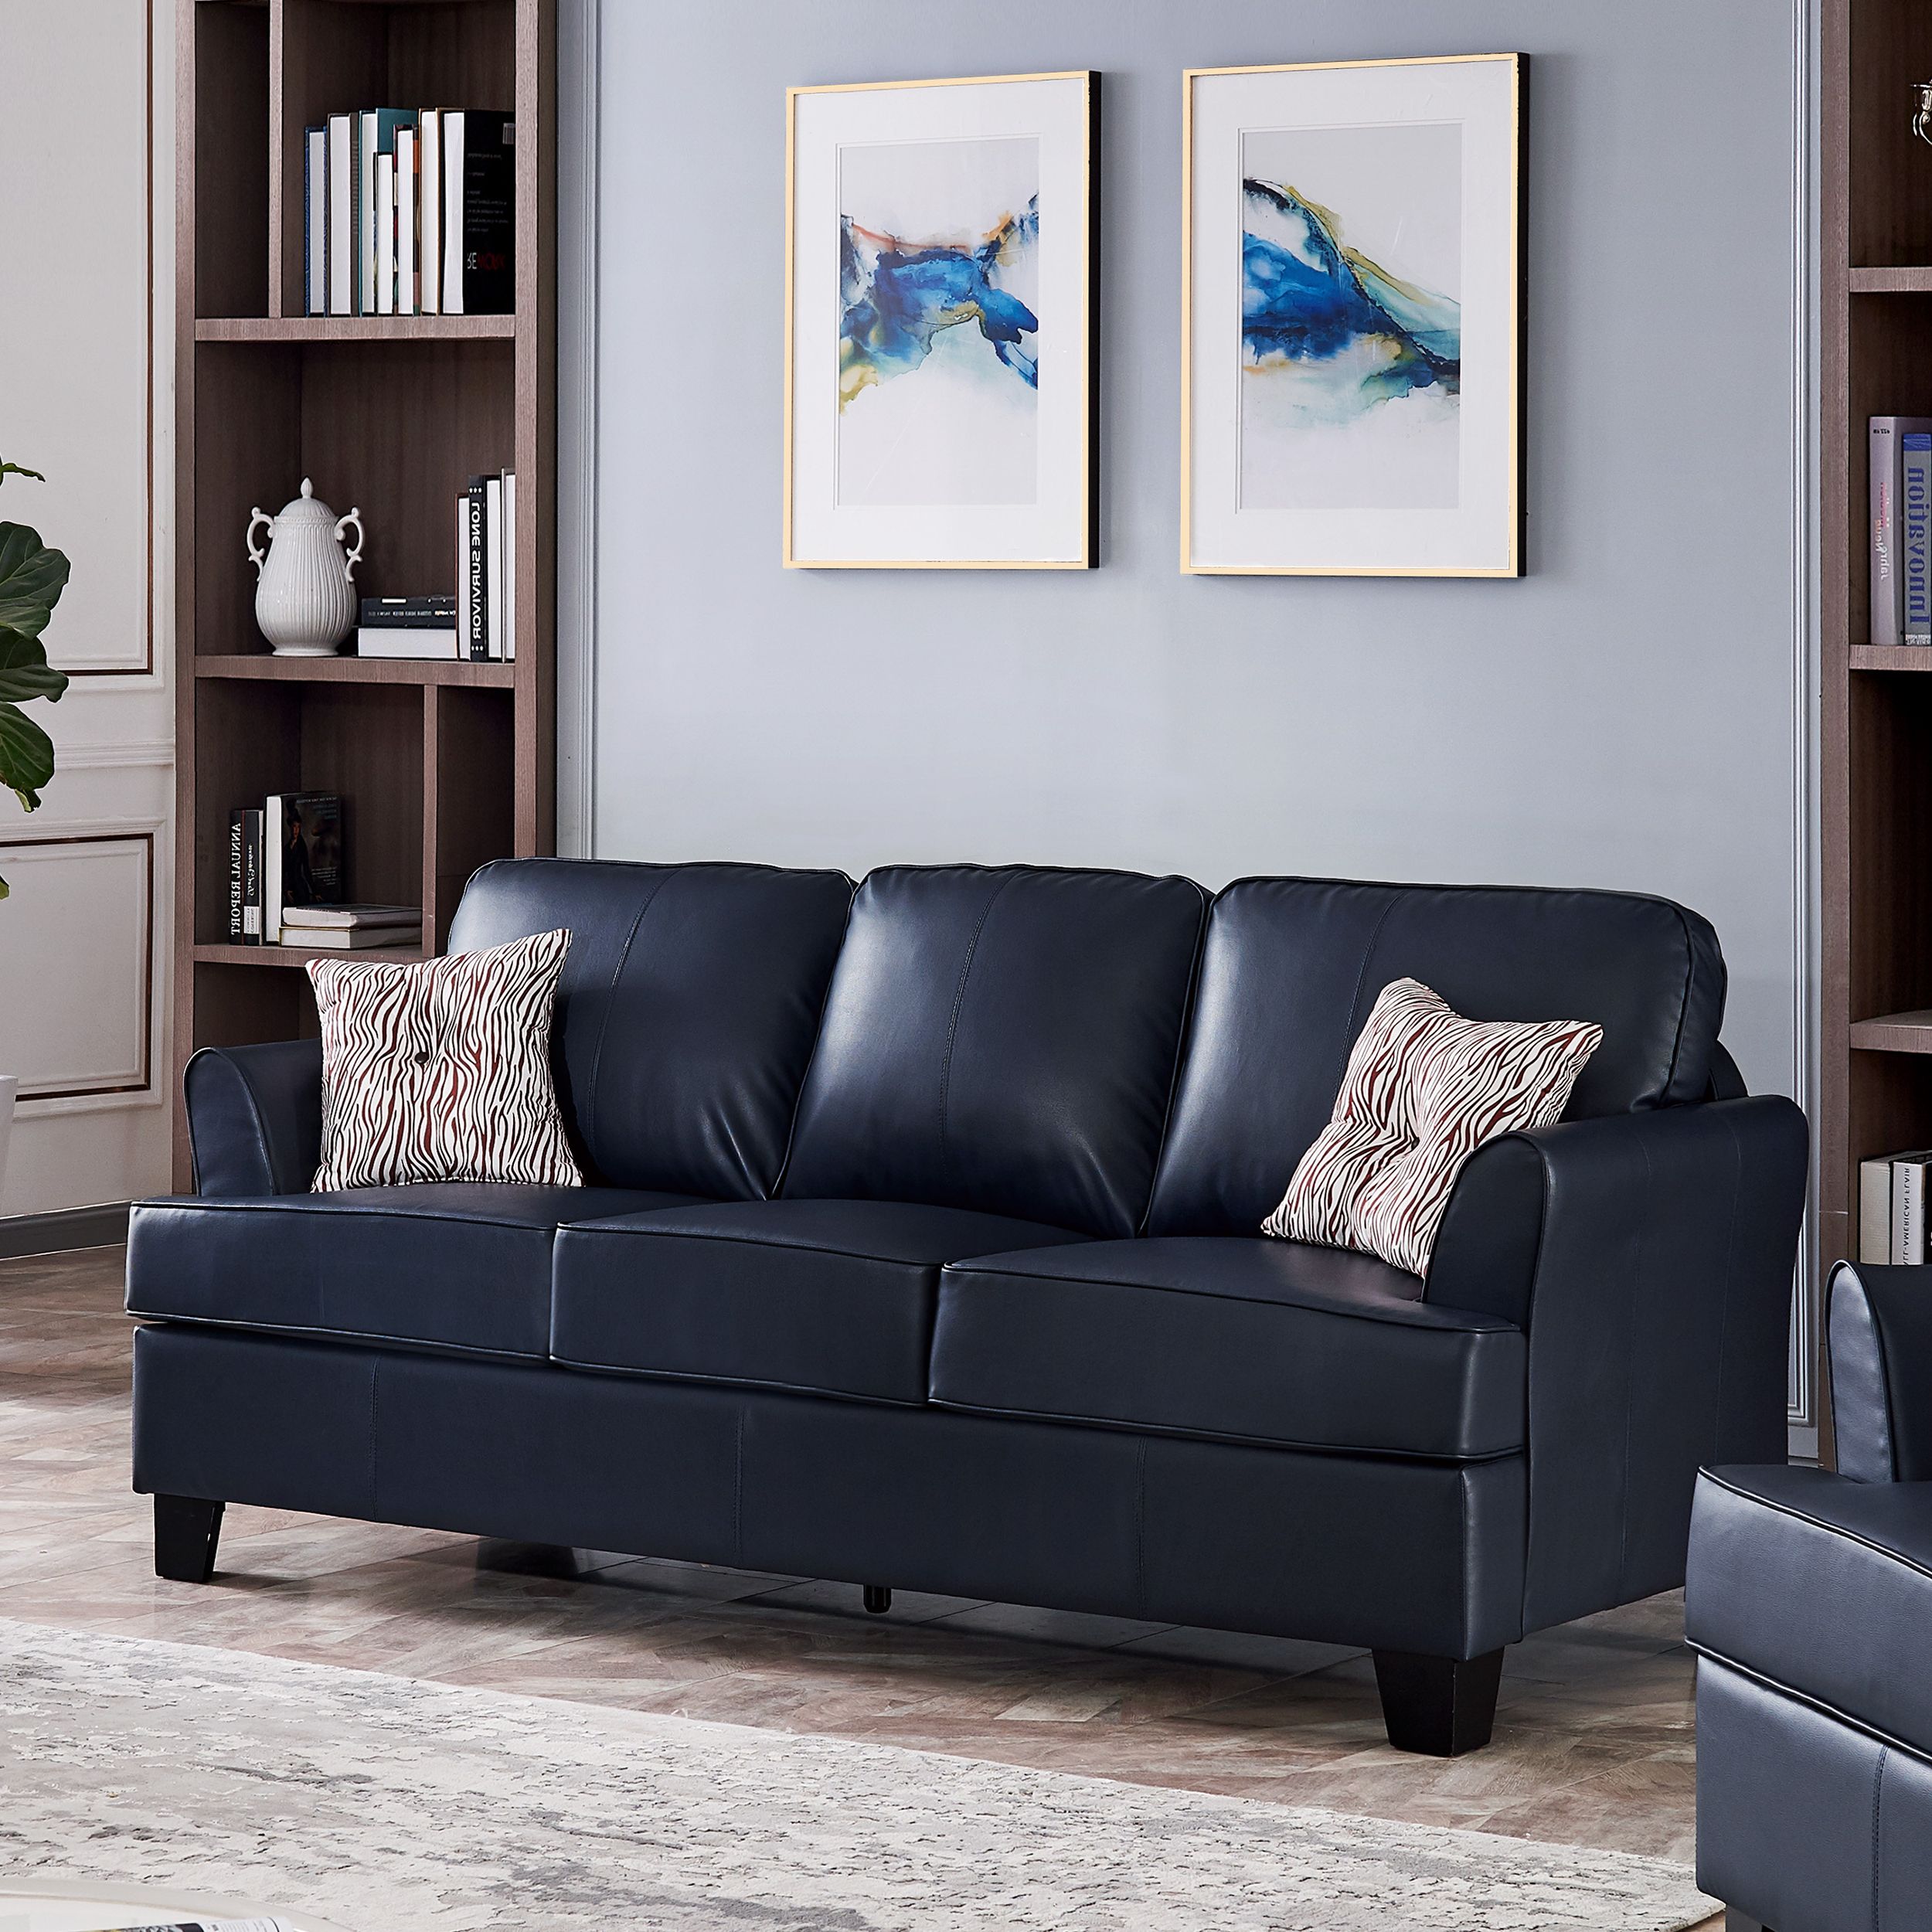 Alexandria Leather Sofa (blue) – Taf Furniture For Sofas In Blue (Gallery 10 of 20)